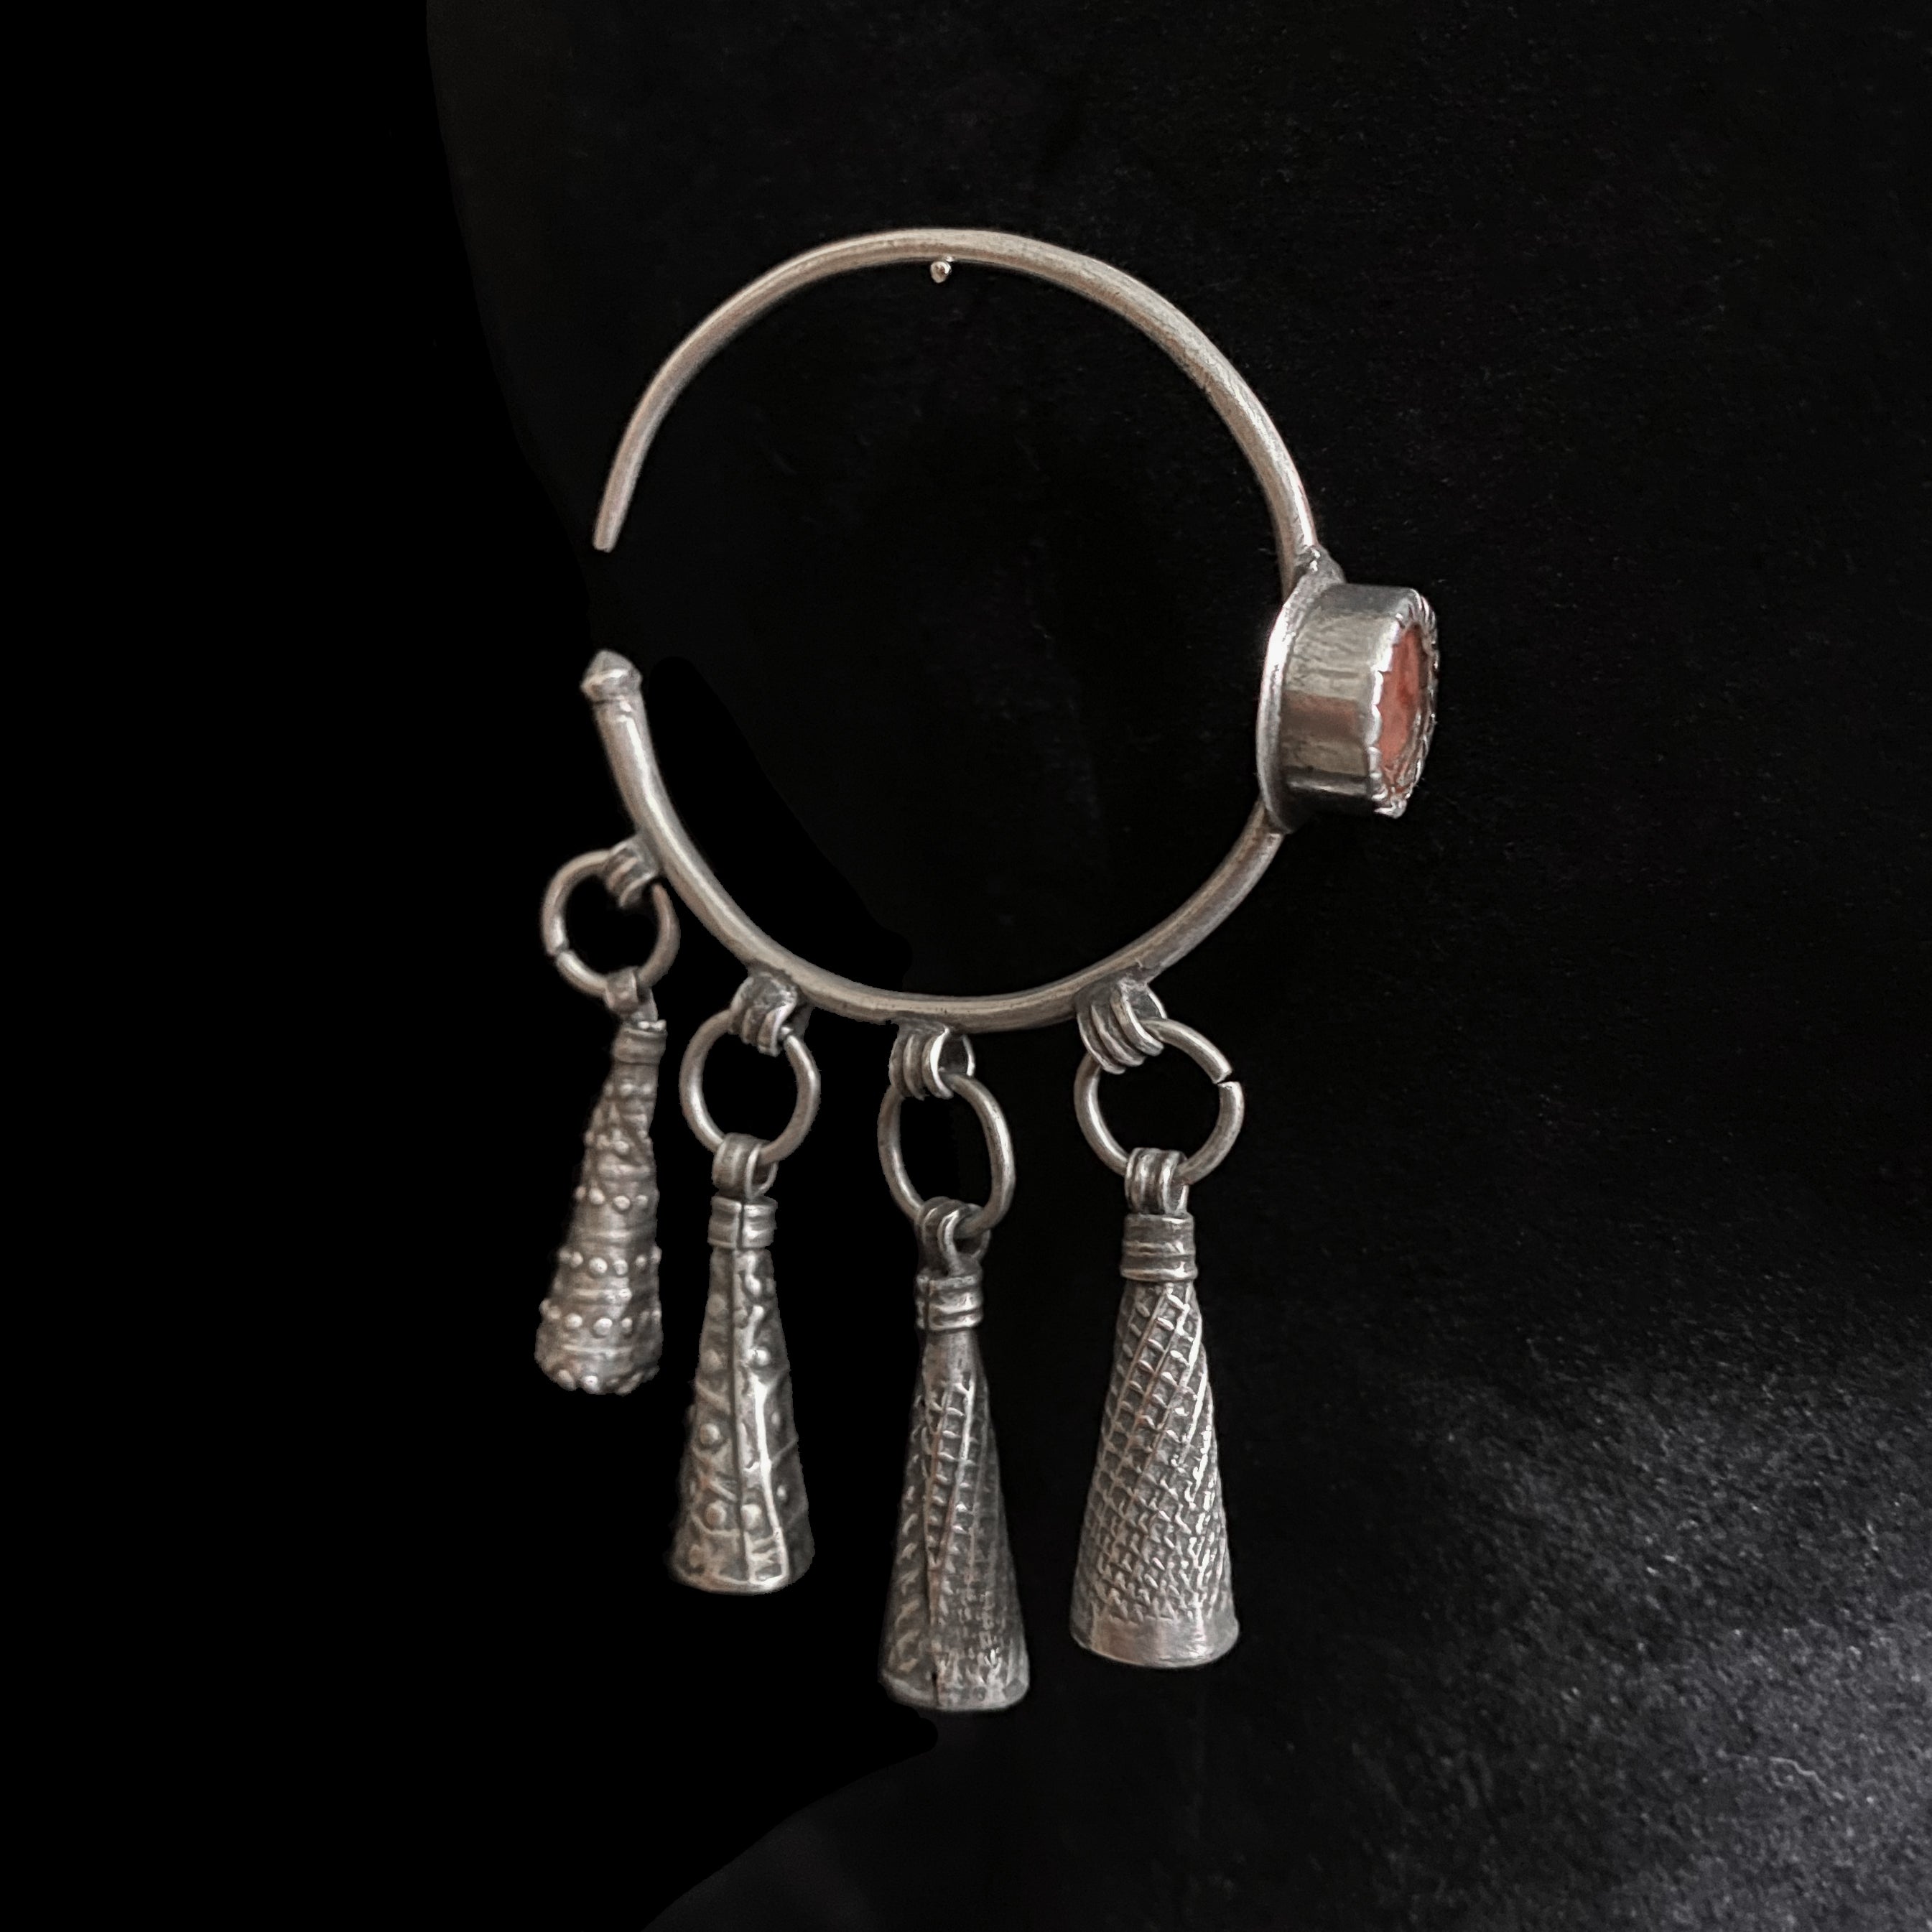 Antique silver earrings from Foum Zguid, South Morocco